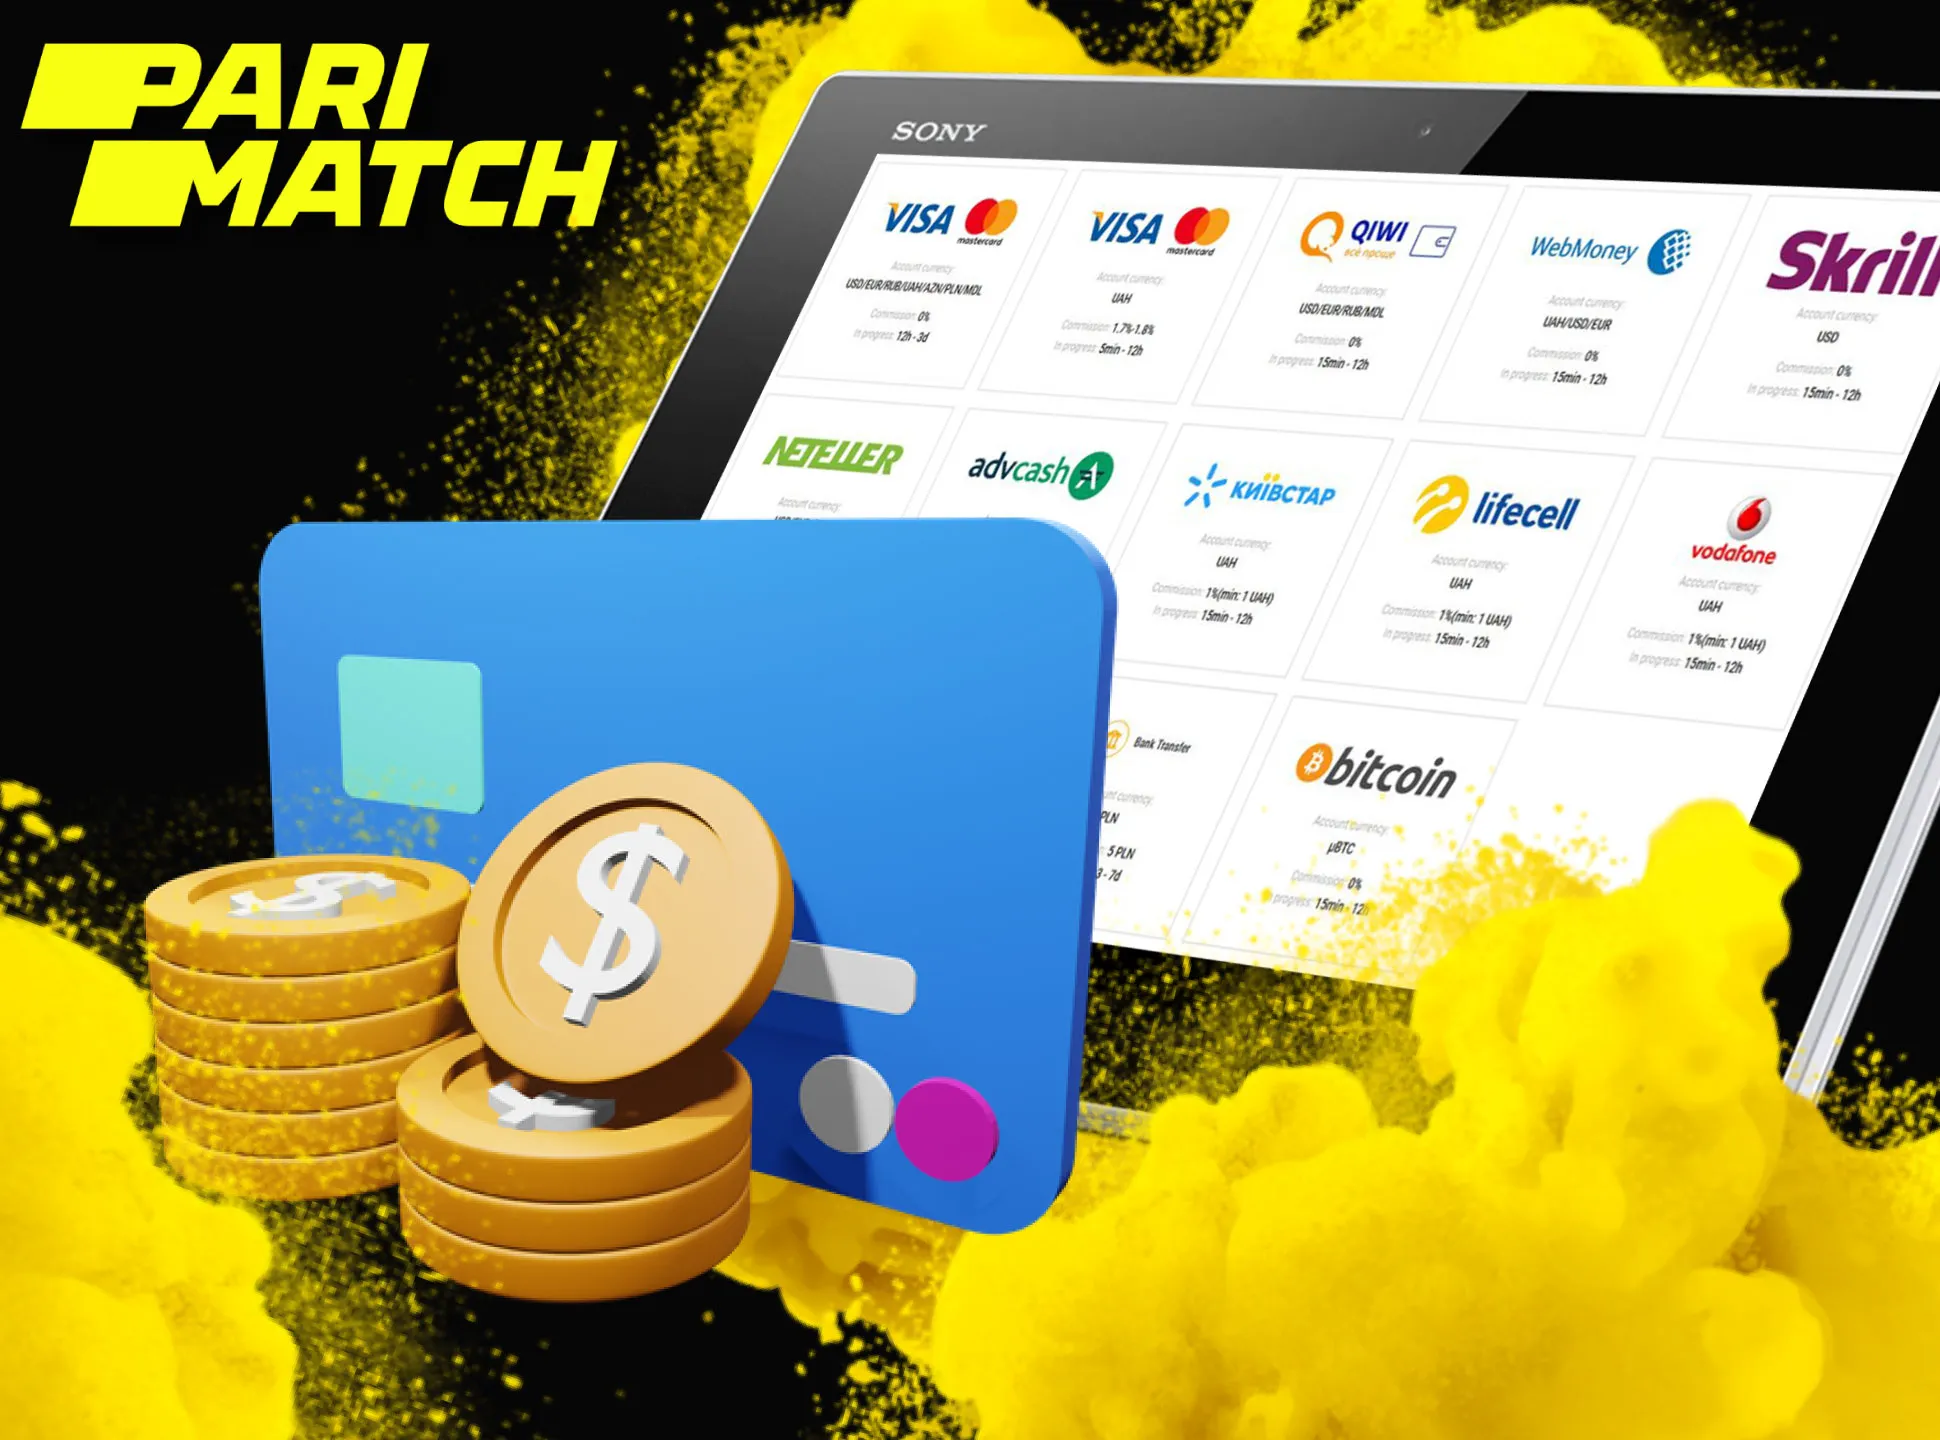 There are lots of different payment methods at Parimatch.